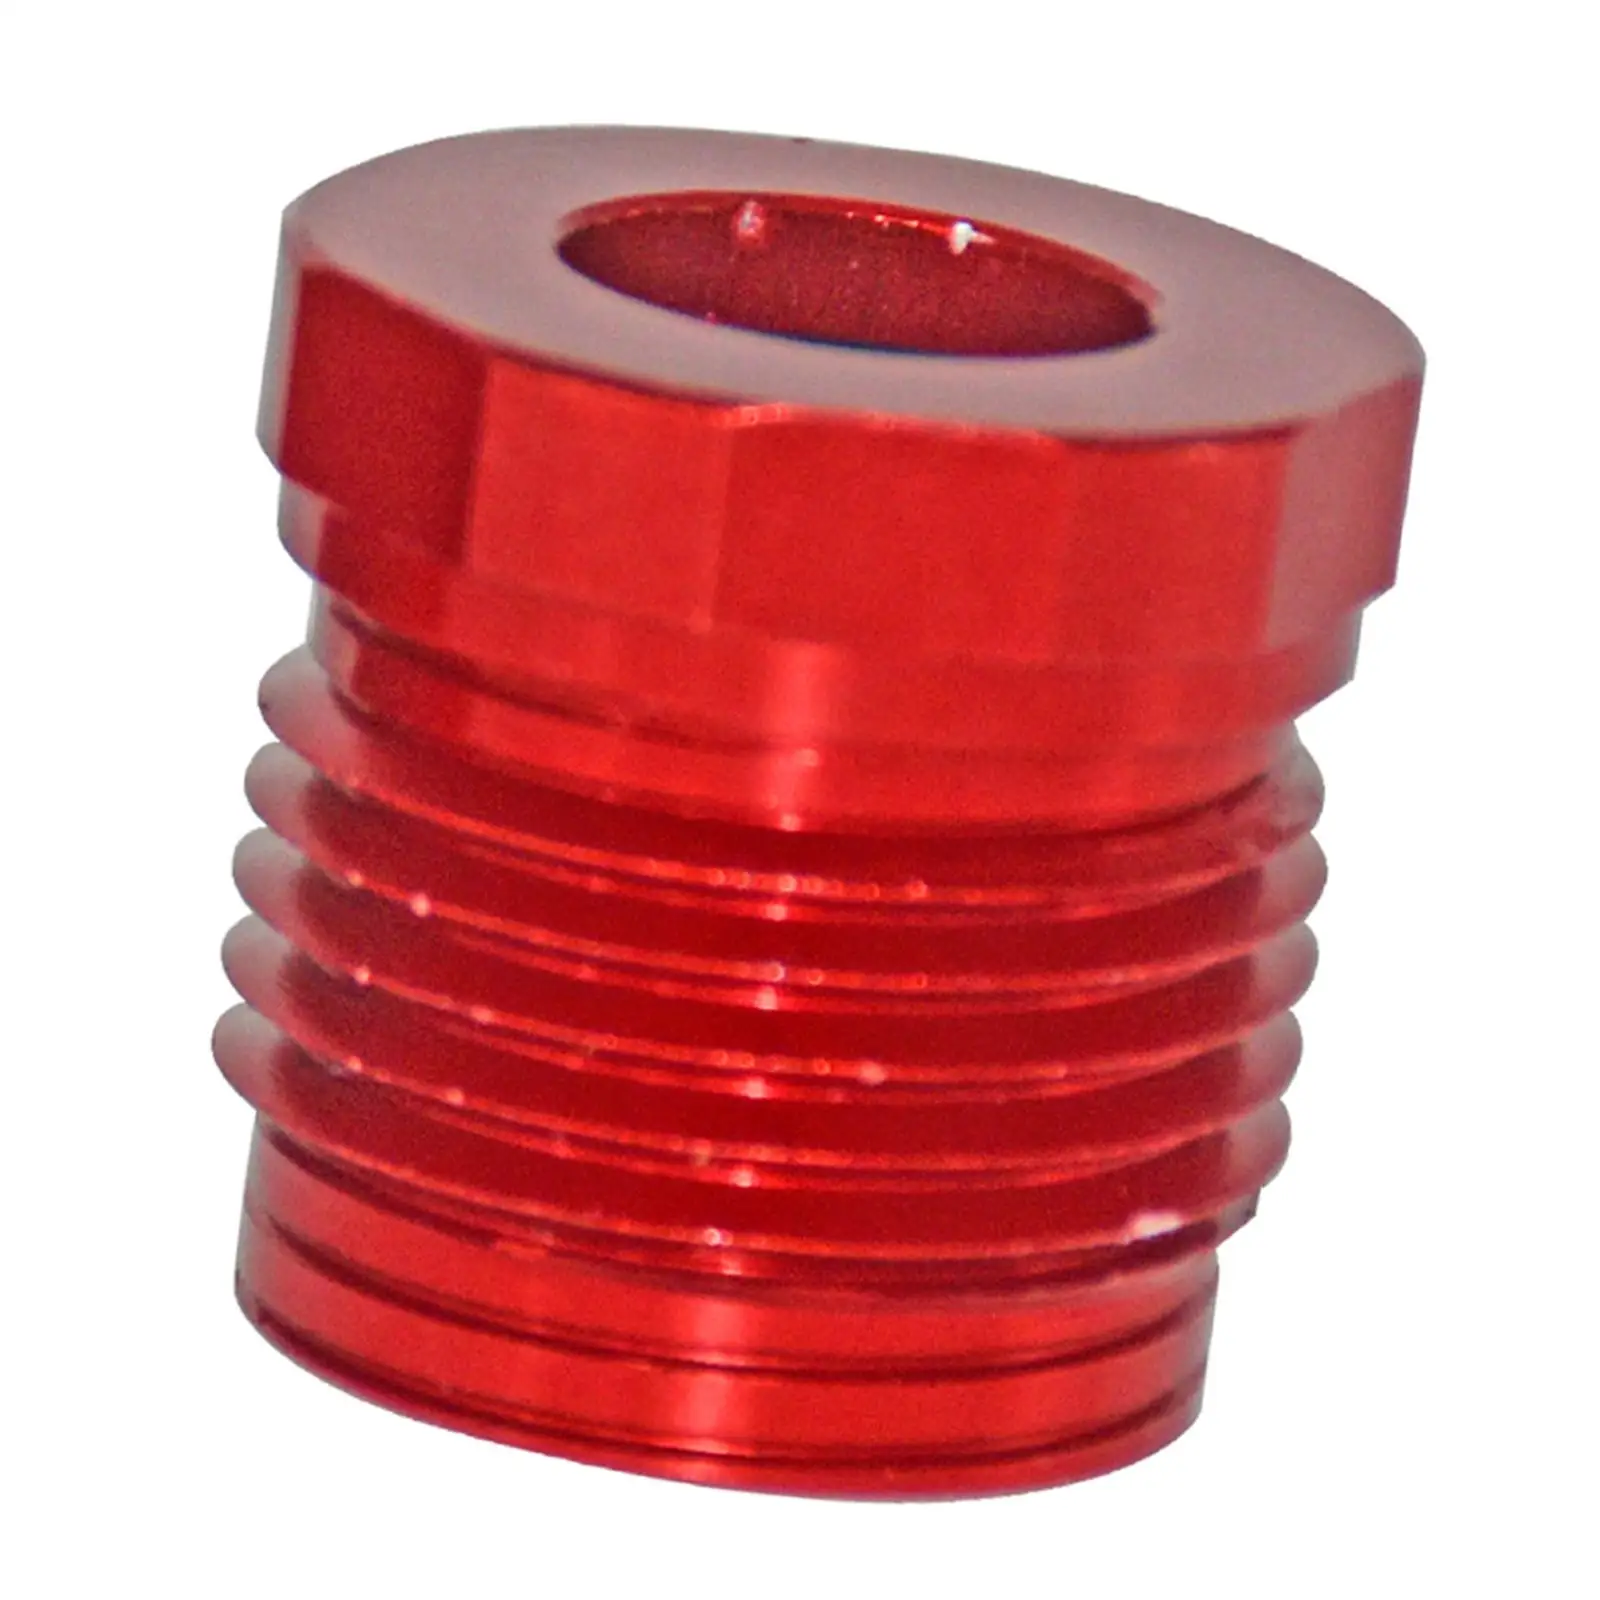 Steering and Reverse Cable Lock Nut Sturdy Replacement Aluminum Red Cable Lock